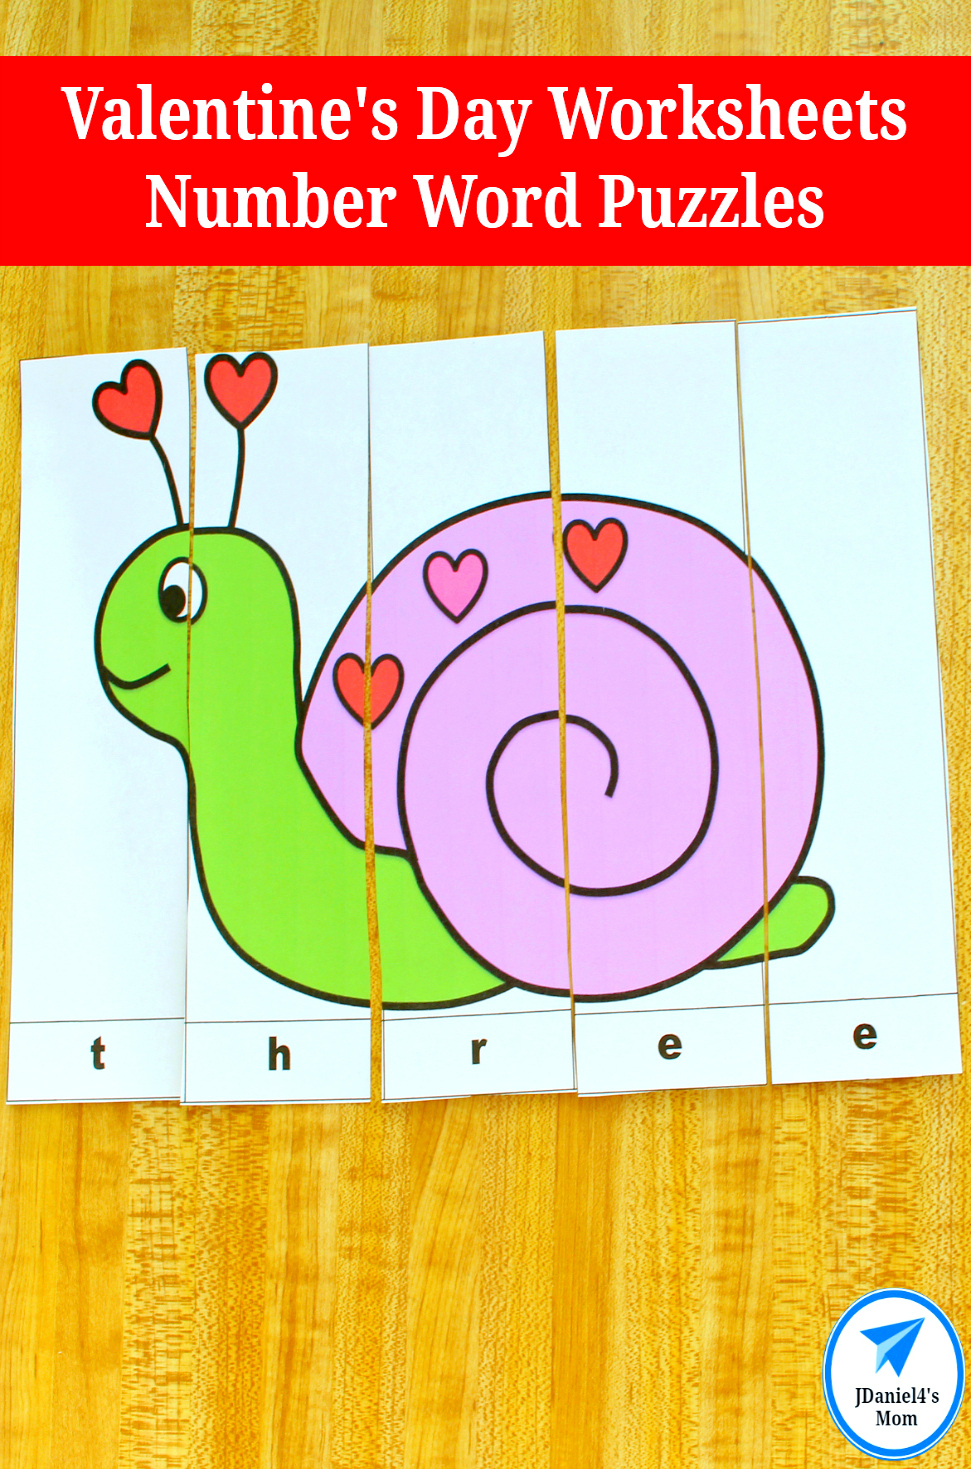 Your children at school and students at home will have fun exploring the puzzles on these Valentine's Day worksheets. They focus on letters in the number words in order. #jdaniel4smom #mathprintable #Valentine'sDay 